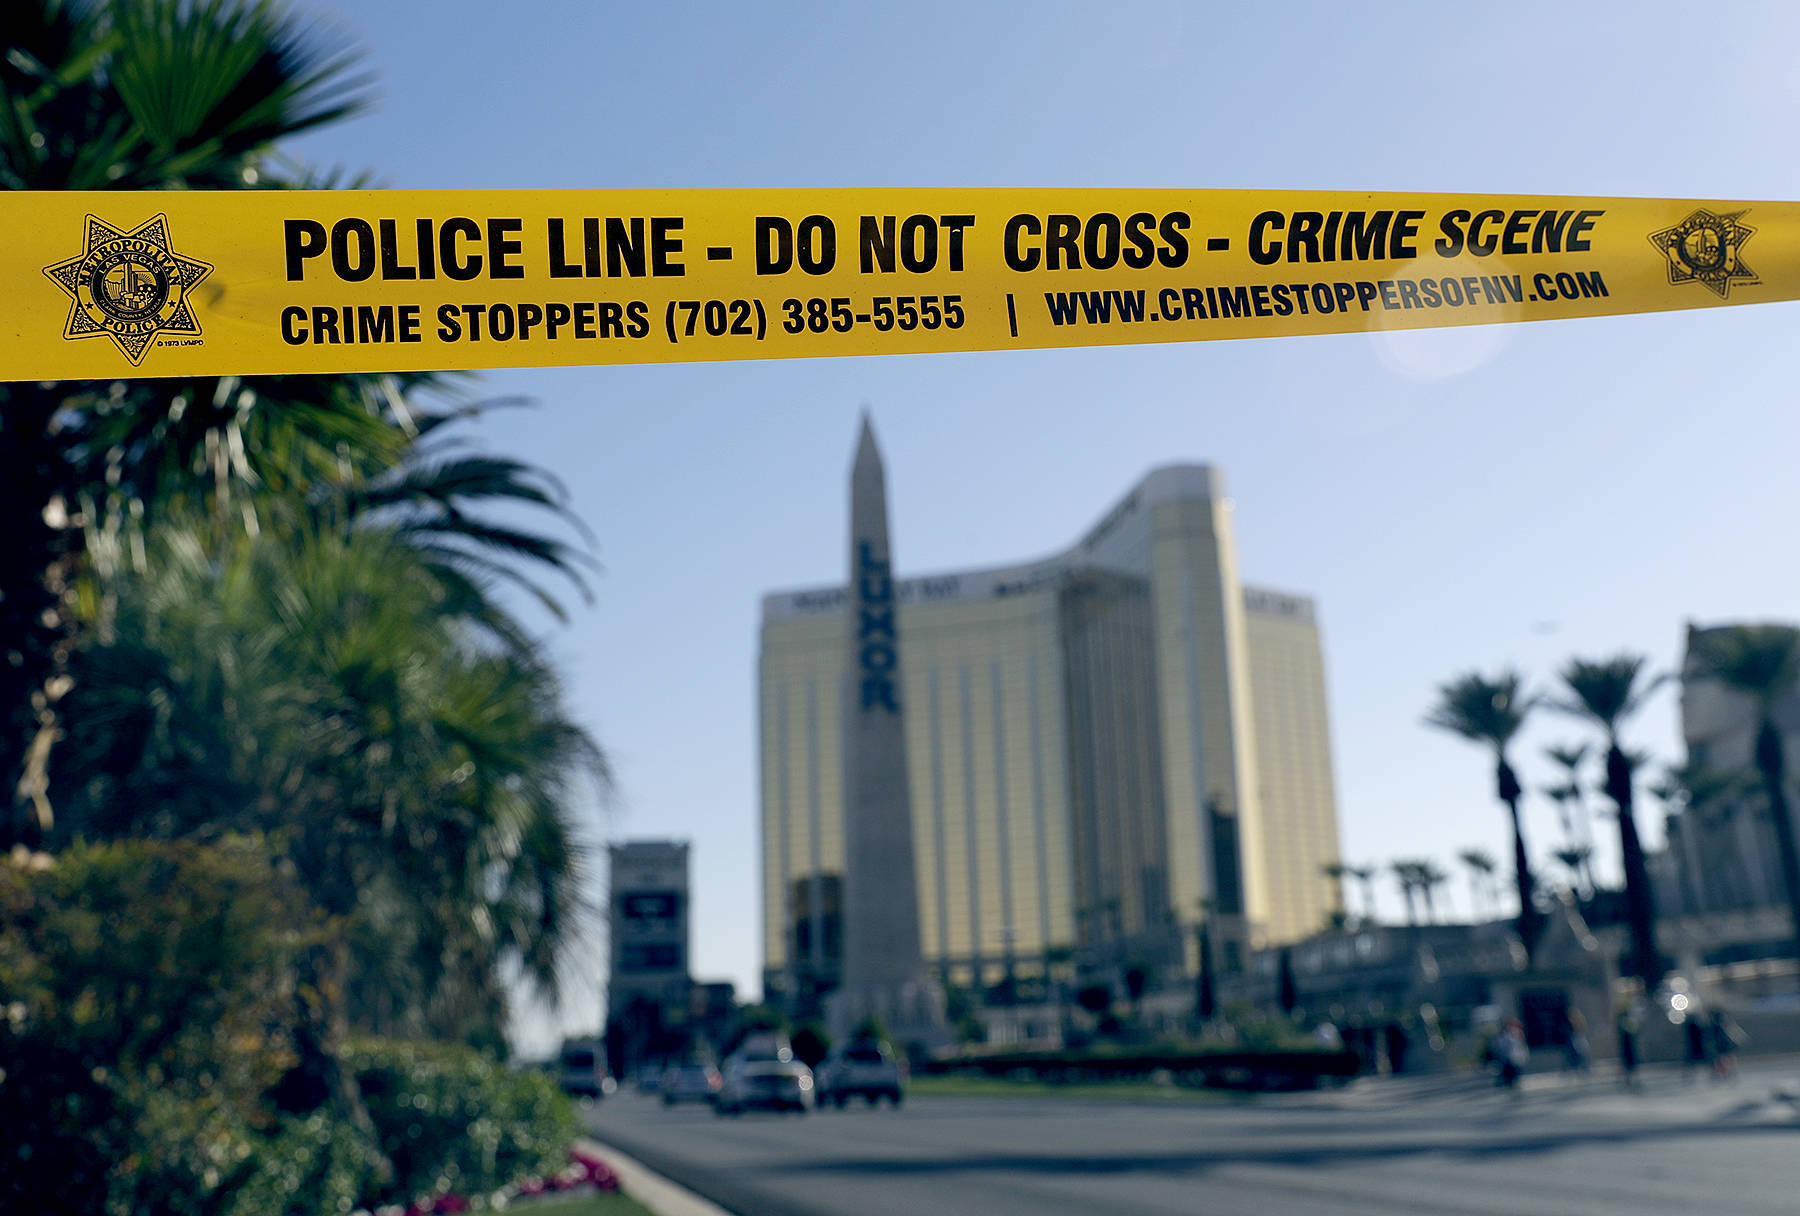 Las Vegas shooter acted alone, exact motive still undetermined: Sheriff